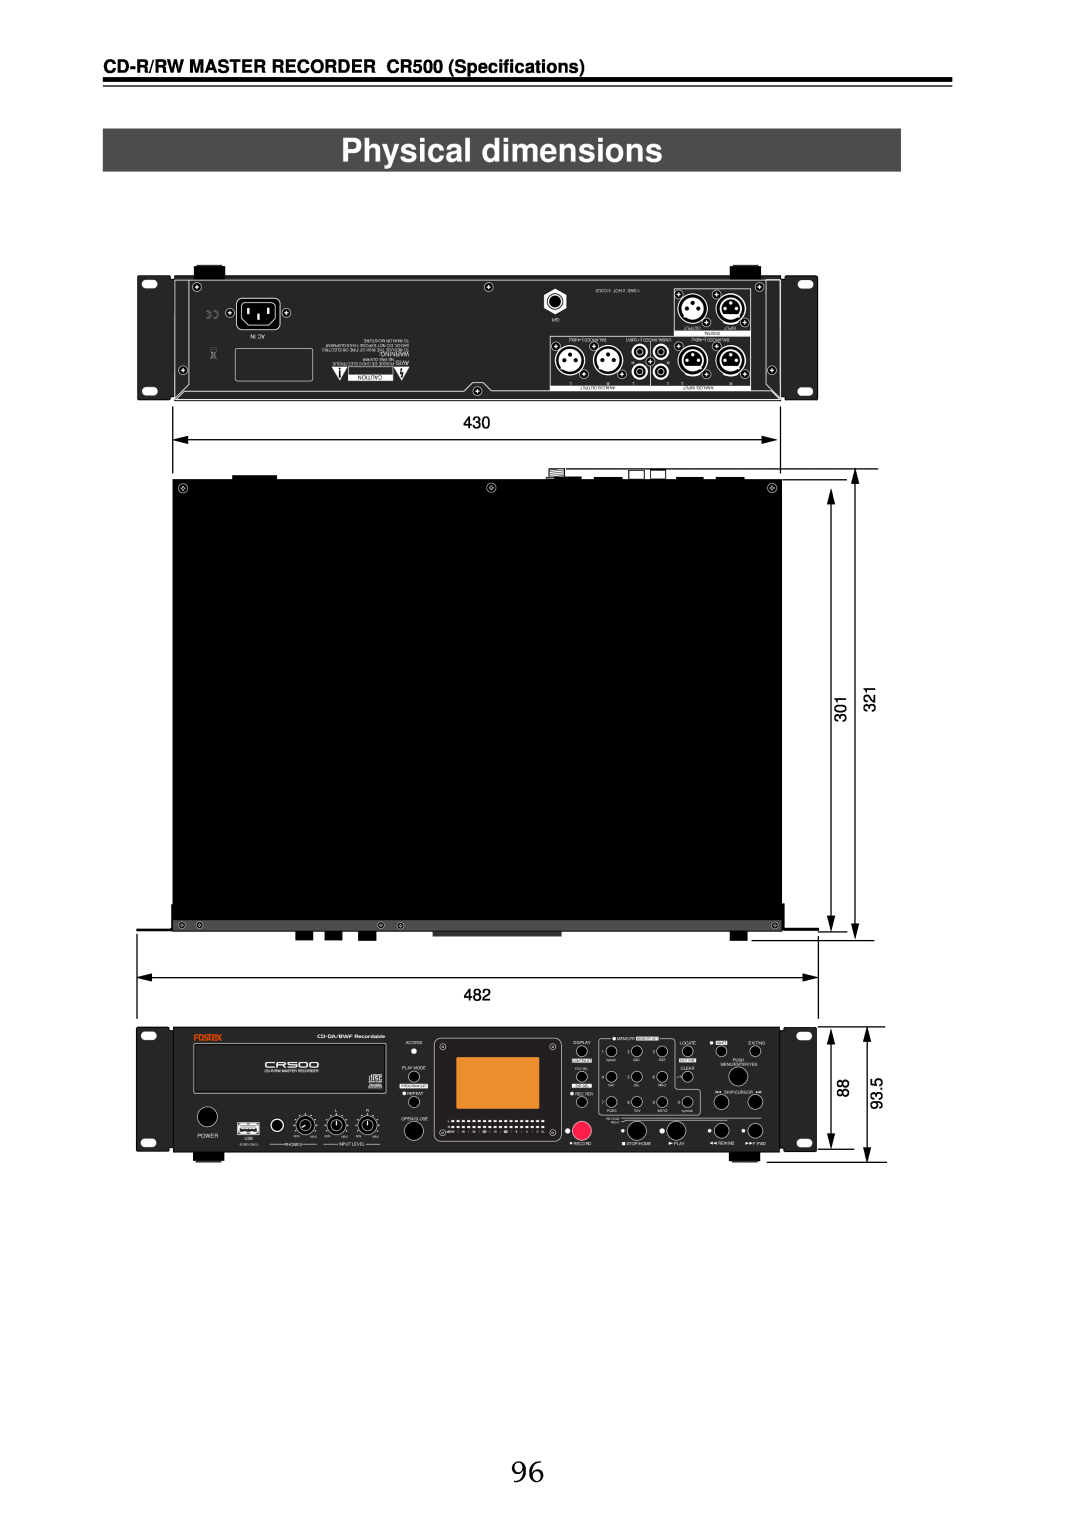 Fostex owner manual Physical dimensions, CD-R/RWMASTER RECORDER CR500 Specifications, In Ac, Power 